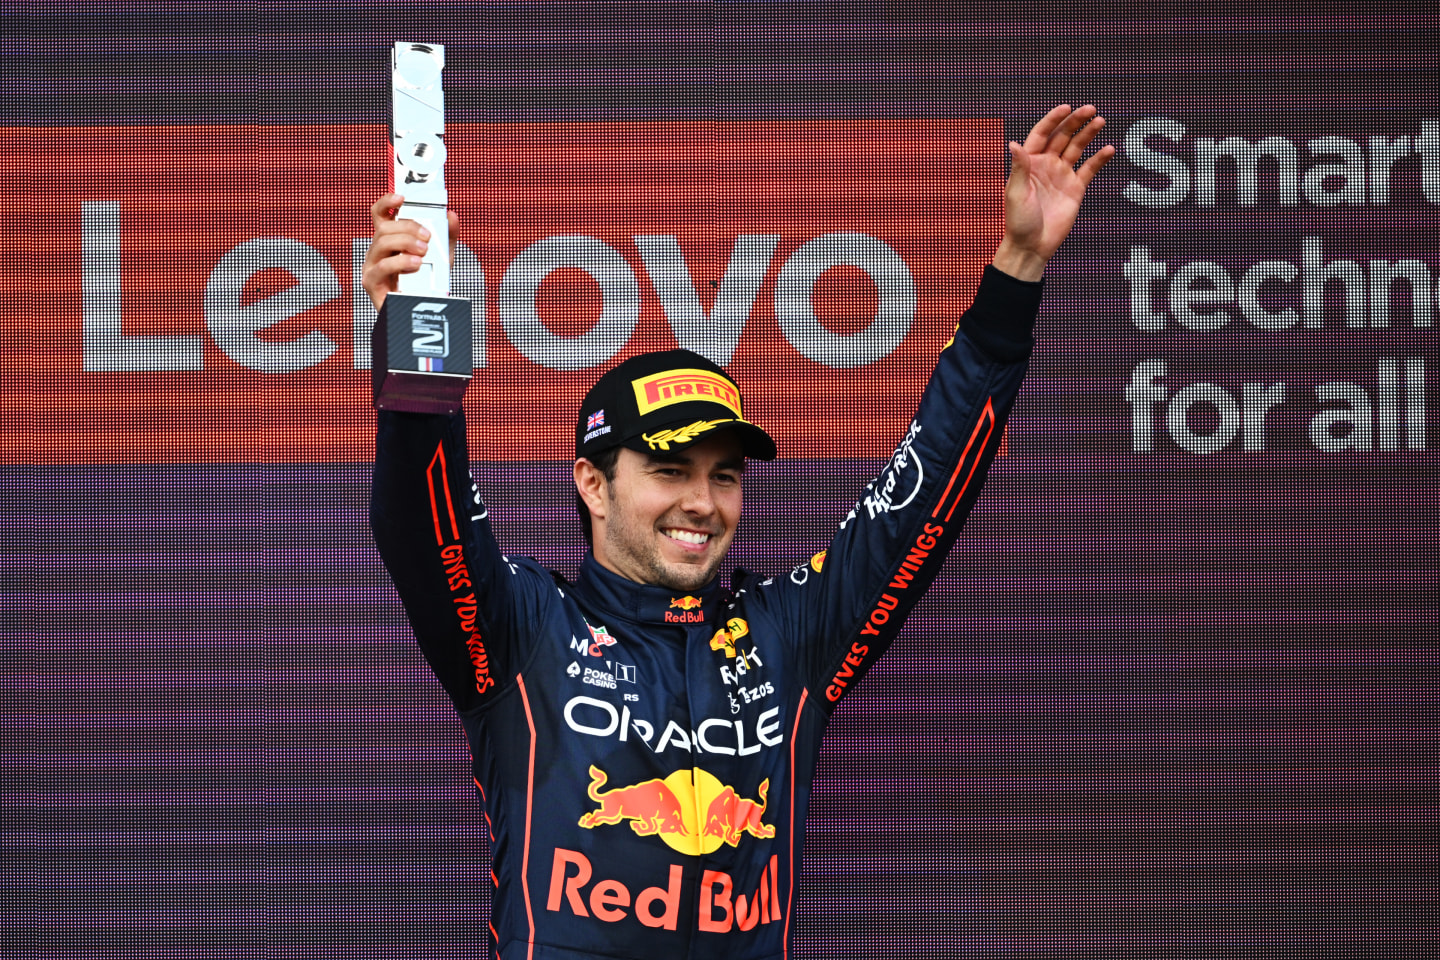 NORTHAMPTON, ENGLAND - JULY 03: Second placed Sergio Perez of Mexico and Oracle Red Bull Racing celebrates on the podium during the F1 Grand Prix of Great Britain at Silverstone on July 03, 2022 in Northampton, England. (Photo by Clive Mason/Getty Images)